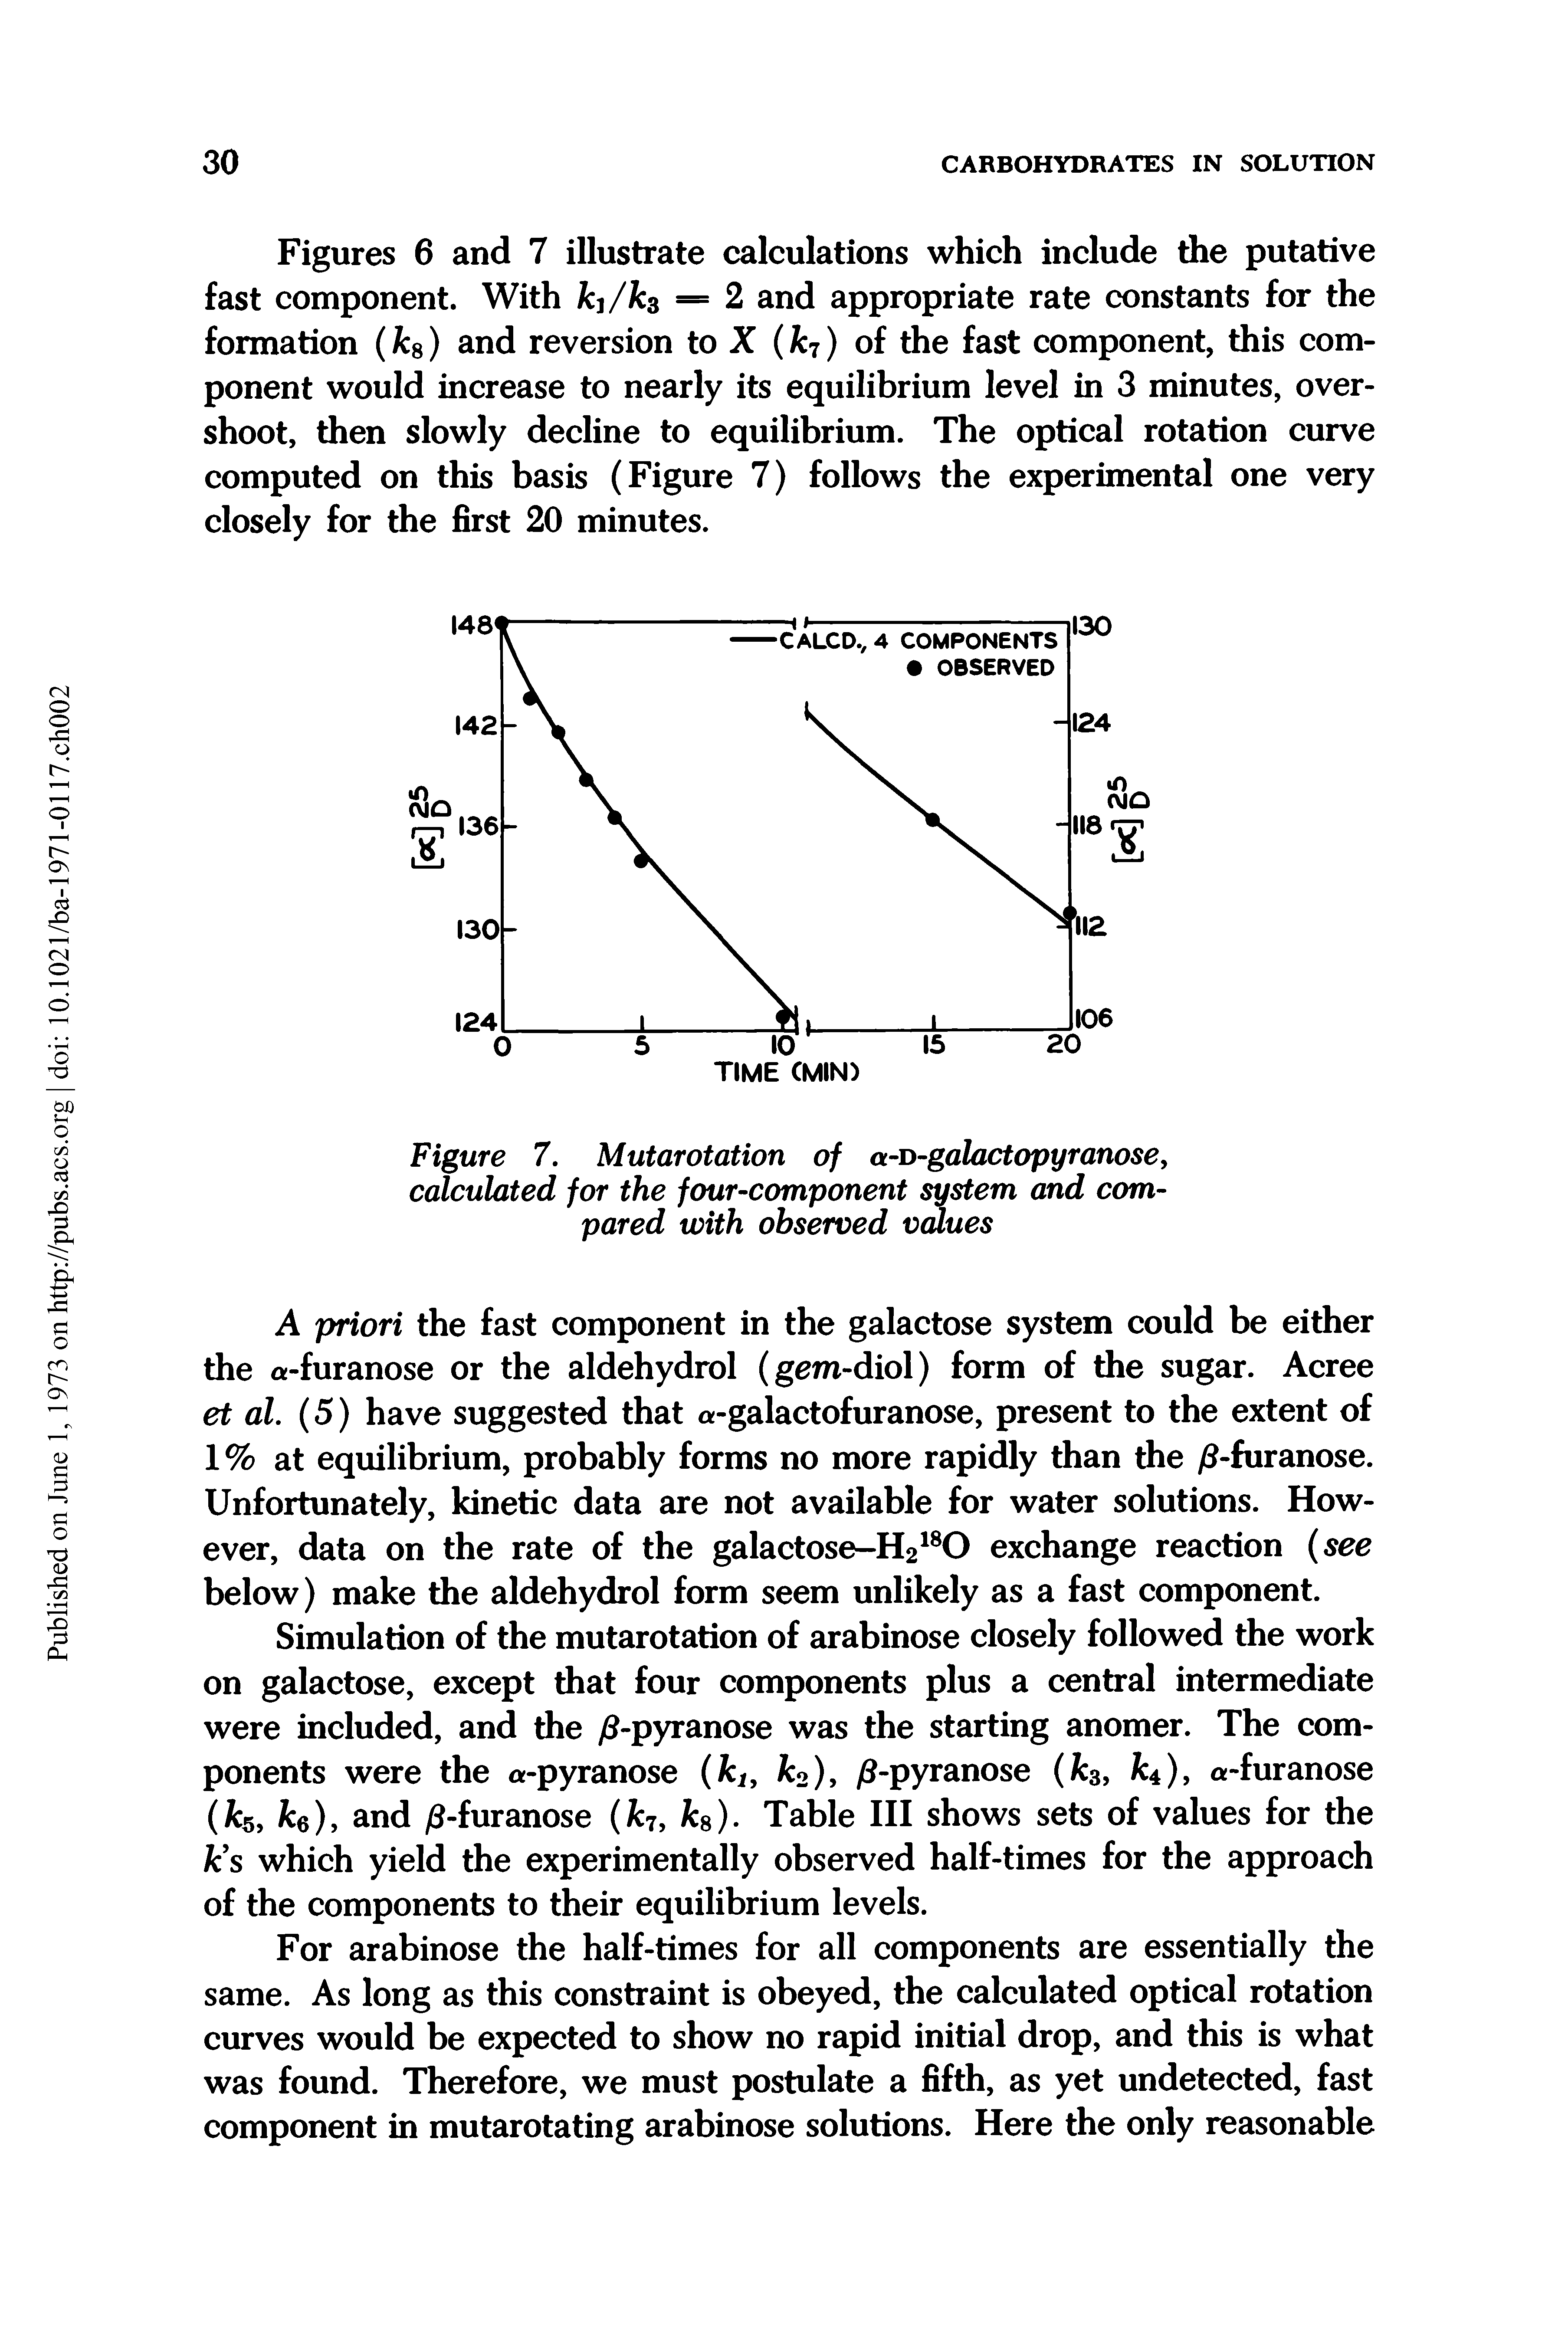 Figures 6 and 7 illustrate calculations which include the putative fast component. With kj/ks = 2 and appropriate rate constants for the formation (ks) and reversion to X (k7) of the fast component, this component would increase to nearly its equilibrium level in 3 minutes, overshoot, then slowly decline to equilibrium. The optical rotation curve computed on this basis (Figure 7) follows the experimental one very closely for the first 20 minutes.